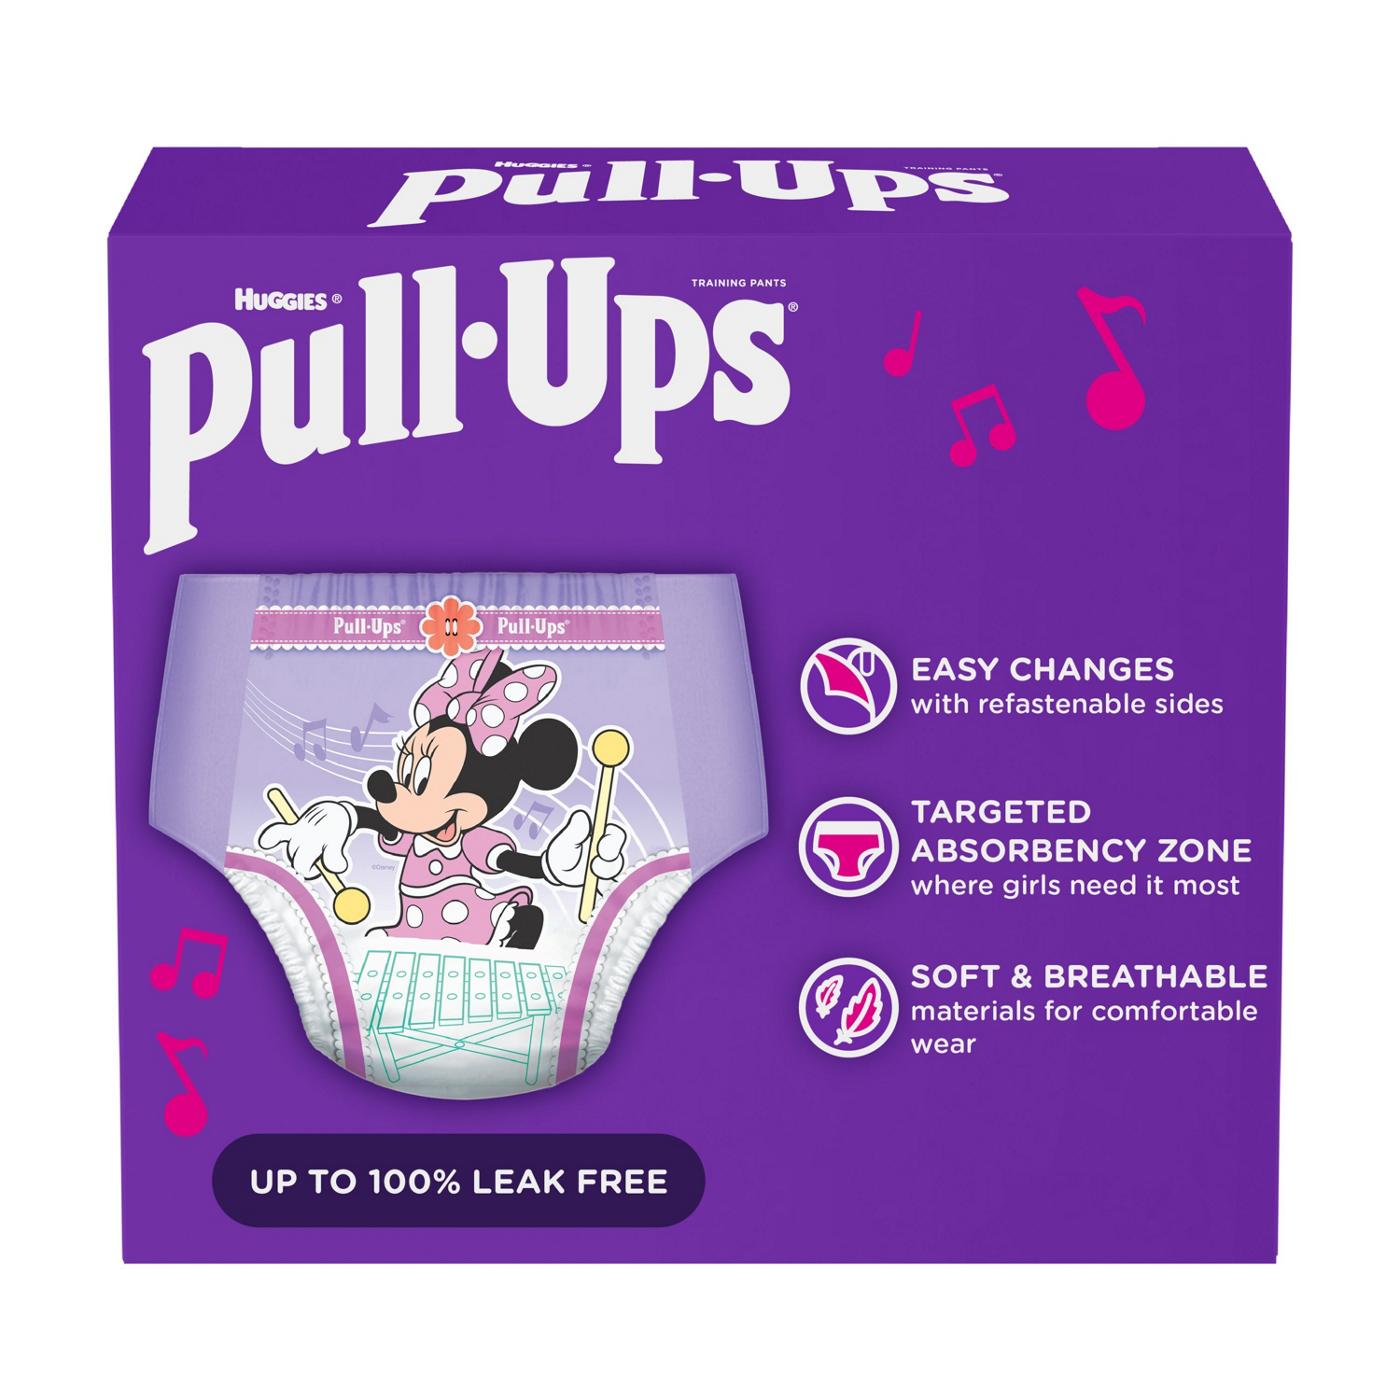 Pull-Ups® - Have you heard? Pull-Ups® training pants are now